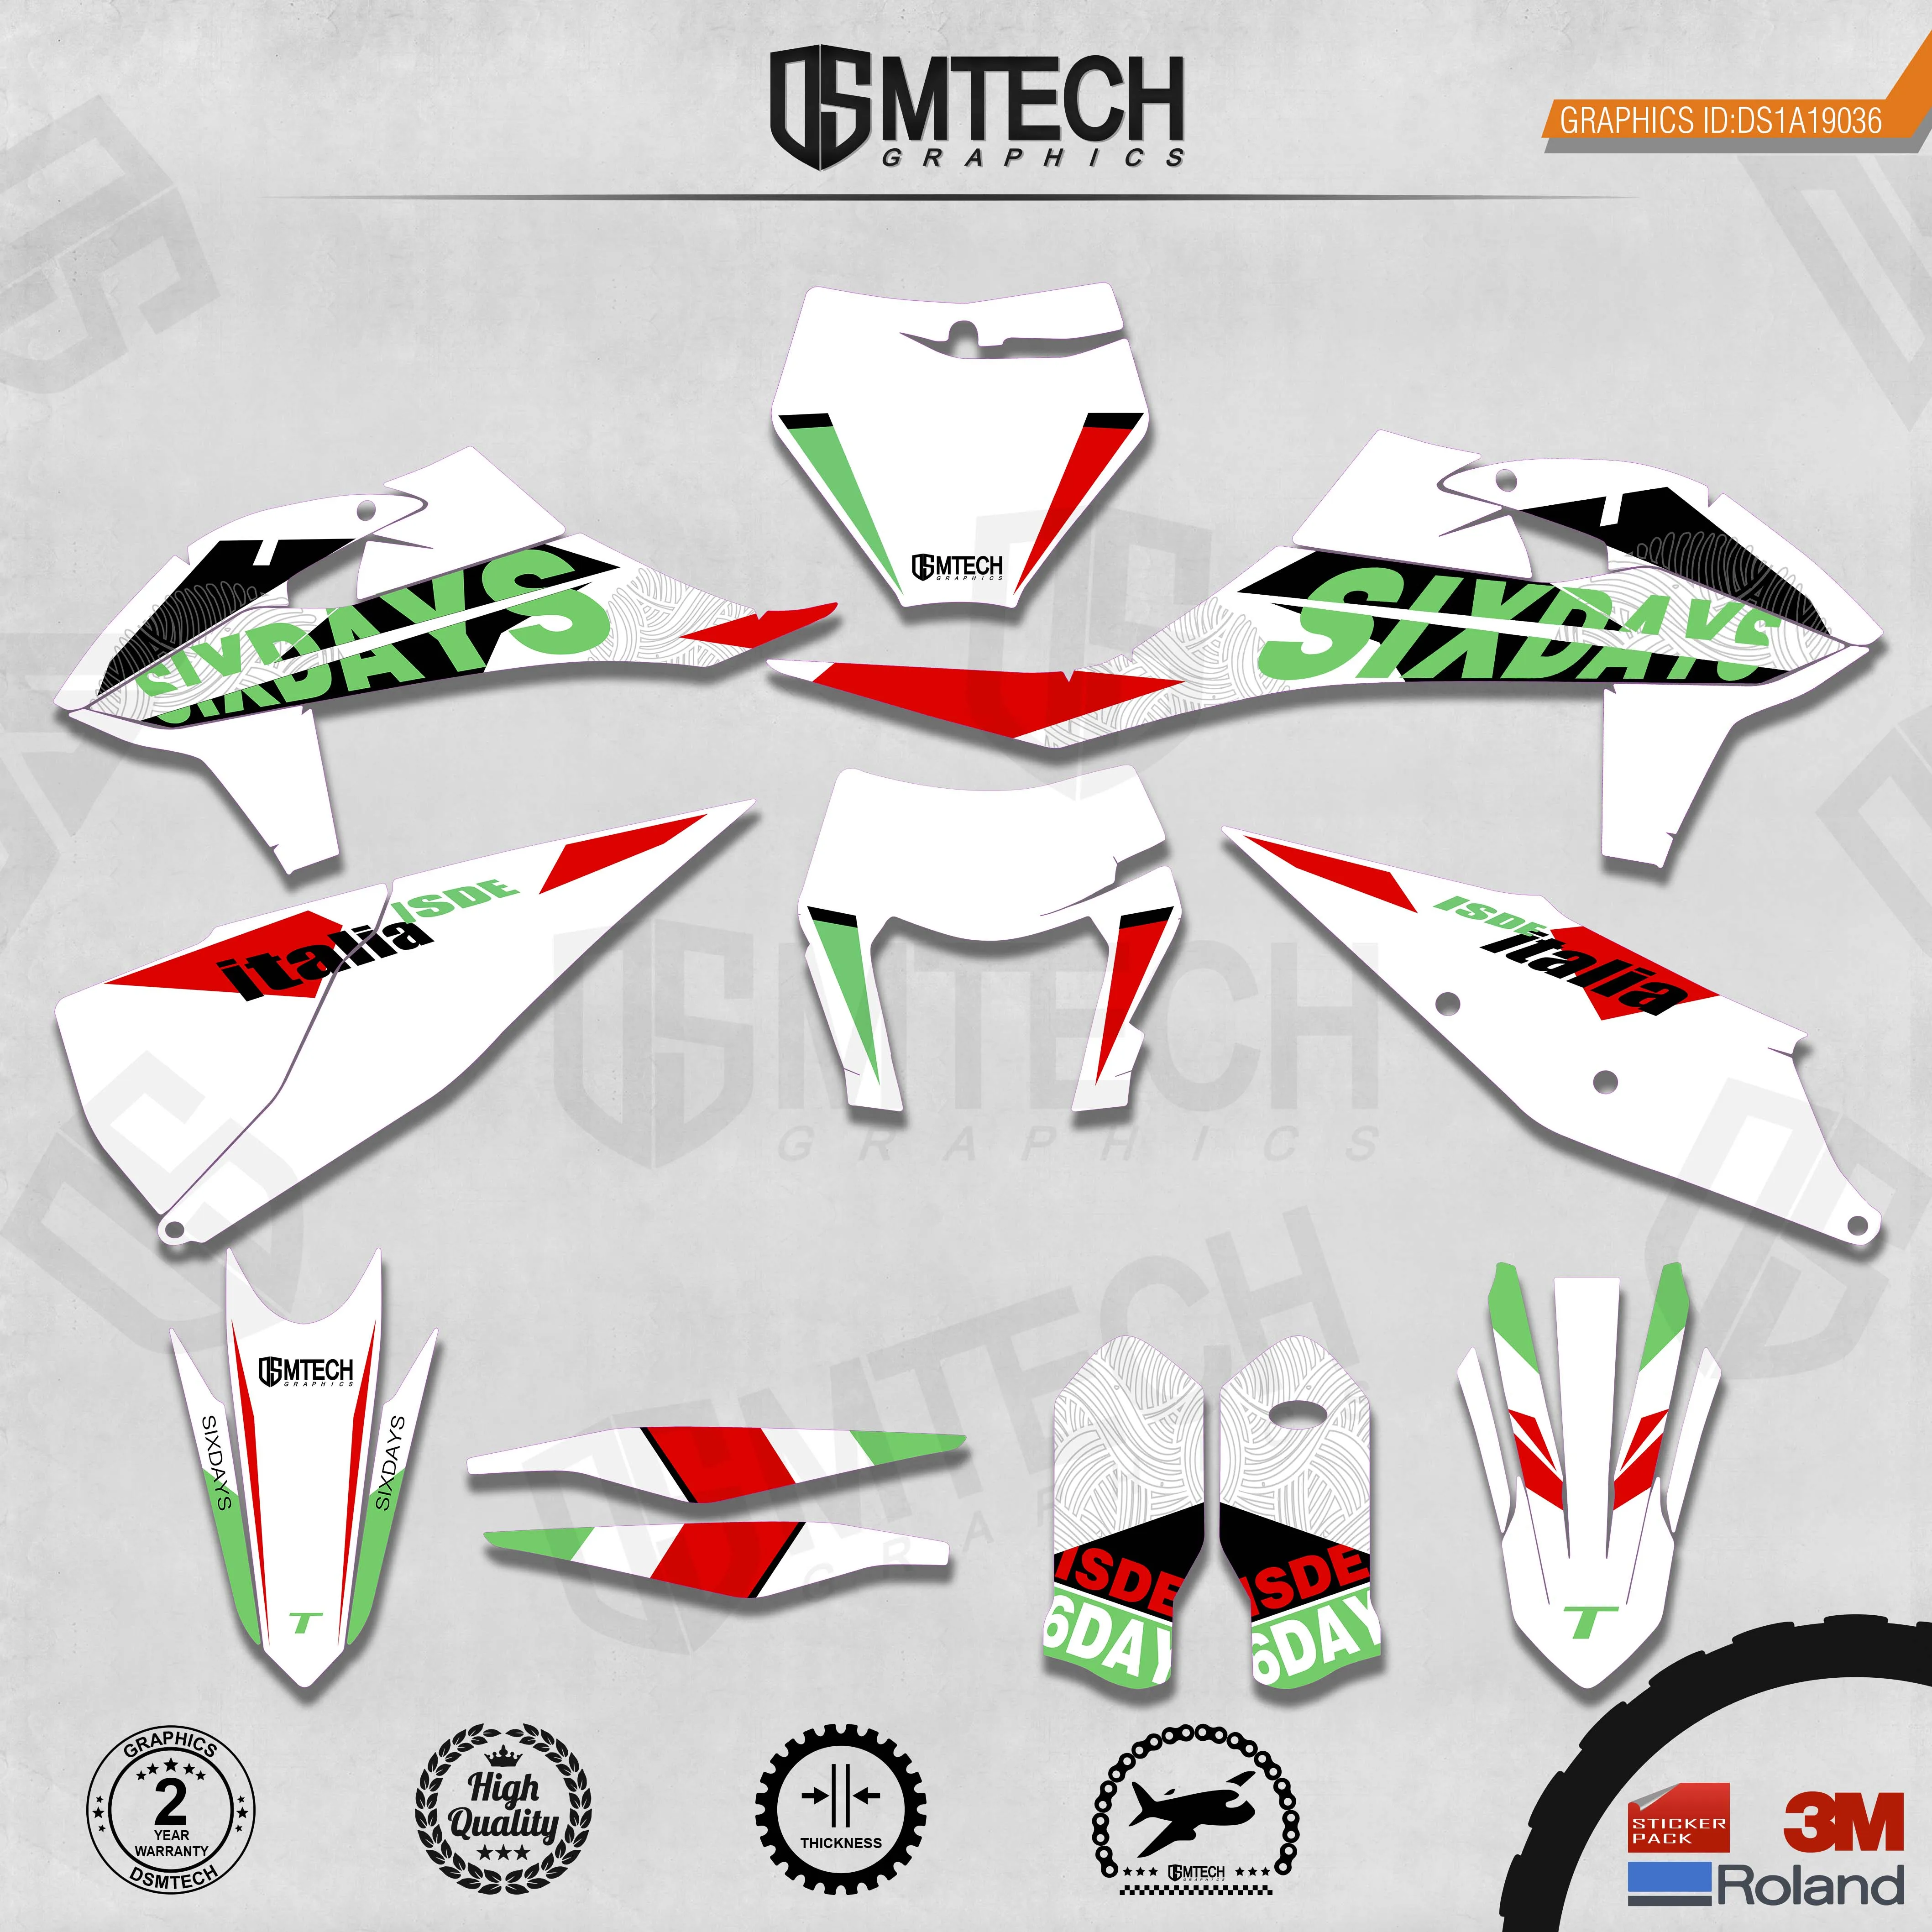 DSMTECH Customized Team Graphics Backgrounds Decals 3M Custom Stickers For 2019-2020 SXF 2020-2021EXC 036